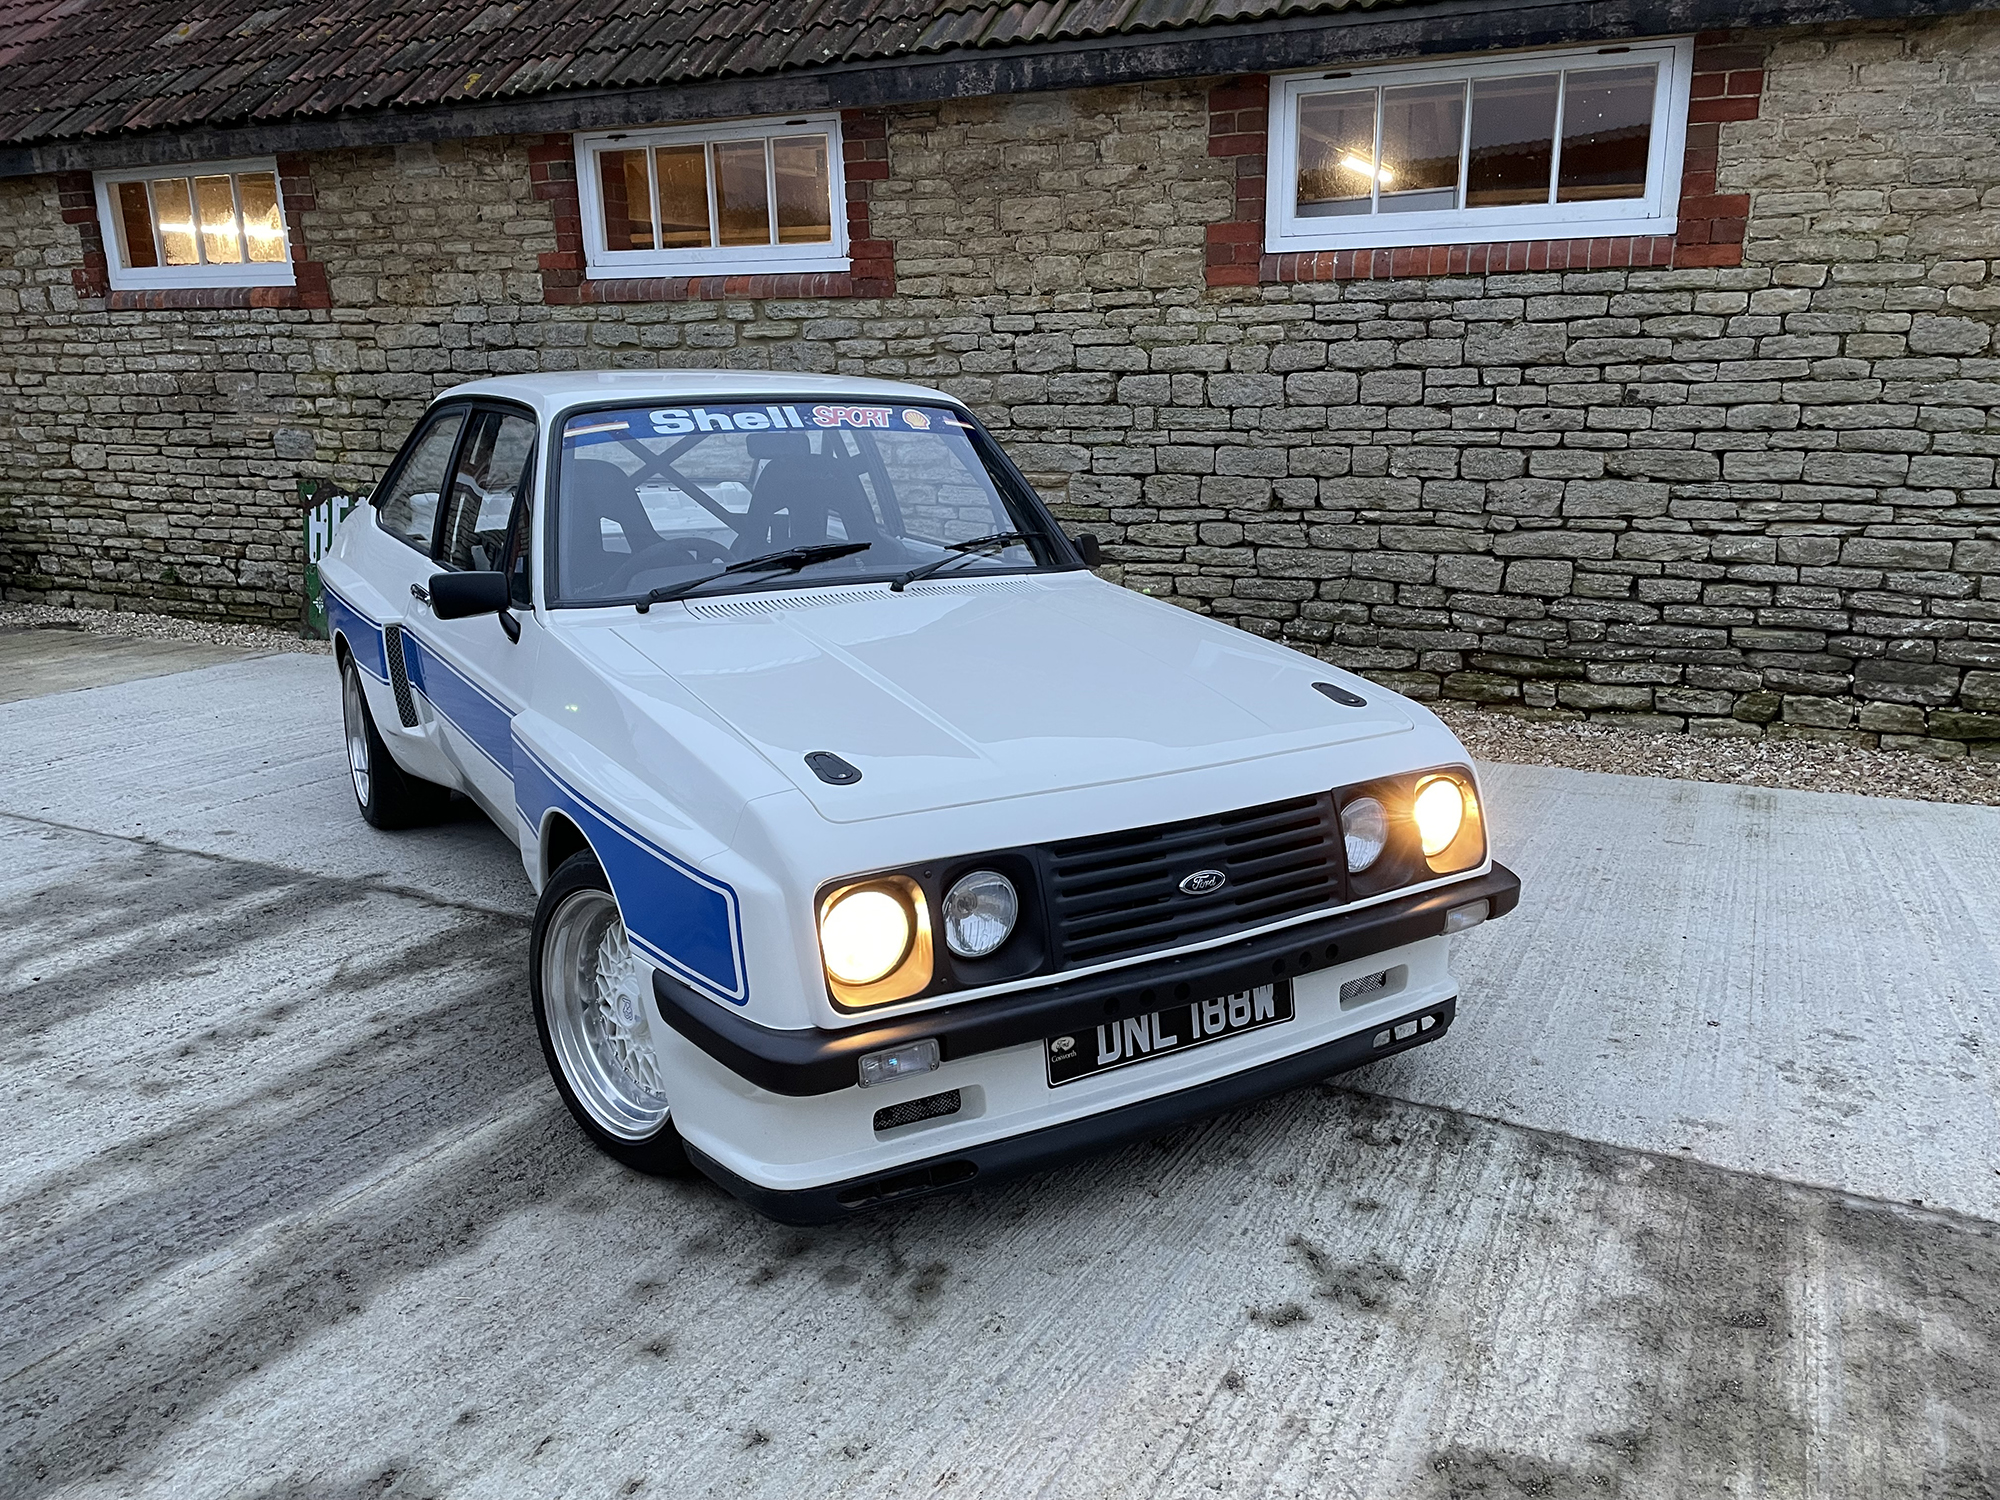 1980 Xpack Kitted Ford Escort Mk2 YB Cosworth Reg. no. DNL 188W Chassis no. BBATAA815570 - Image 27 of 28